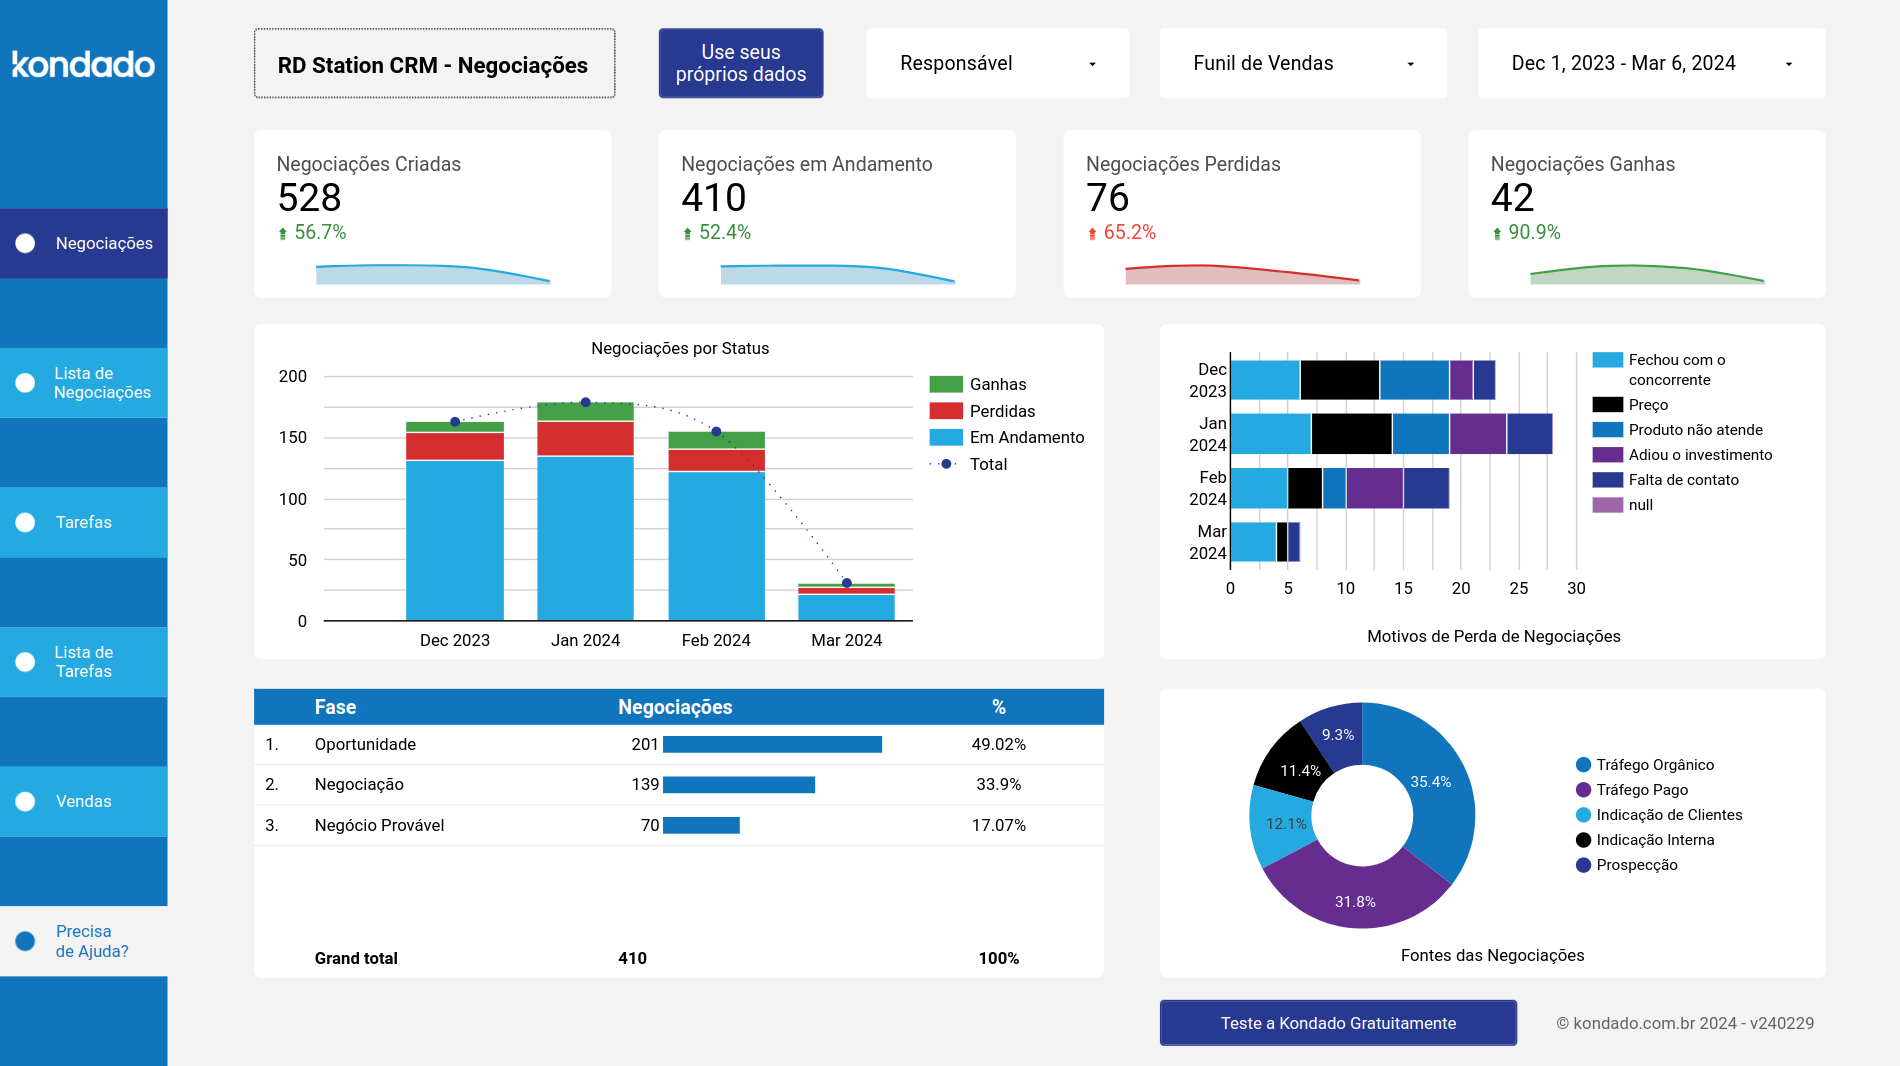 dashboard-rdstationcrm-looker-negociacoes.md